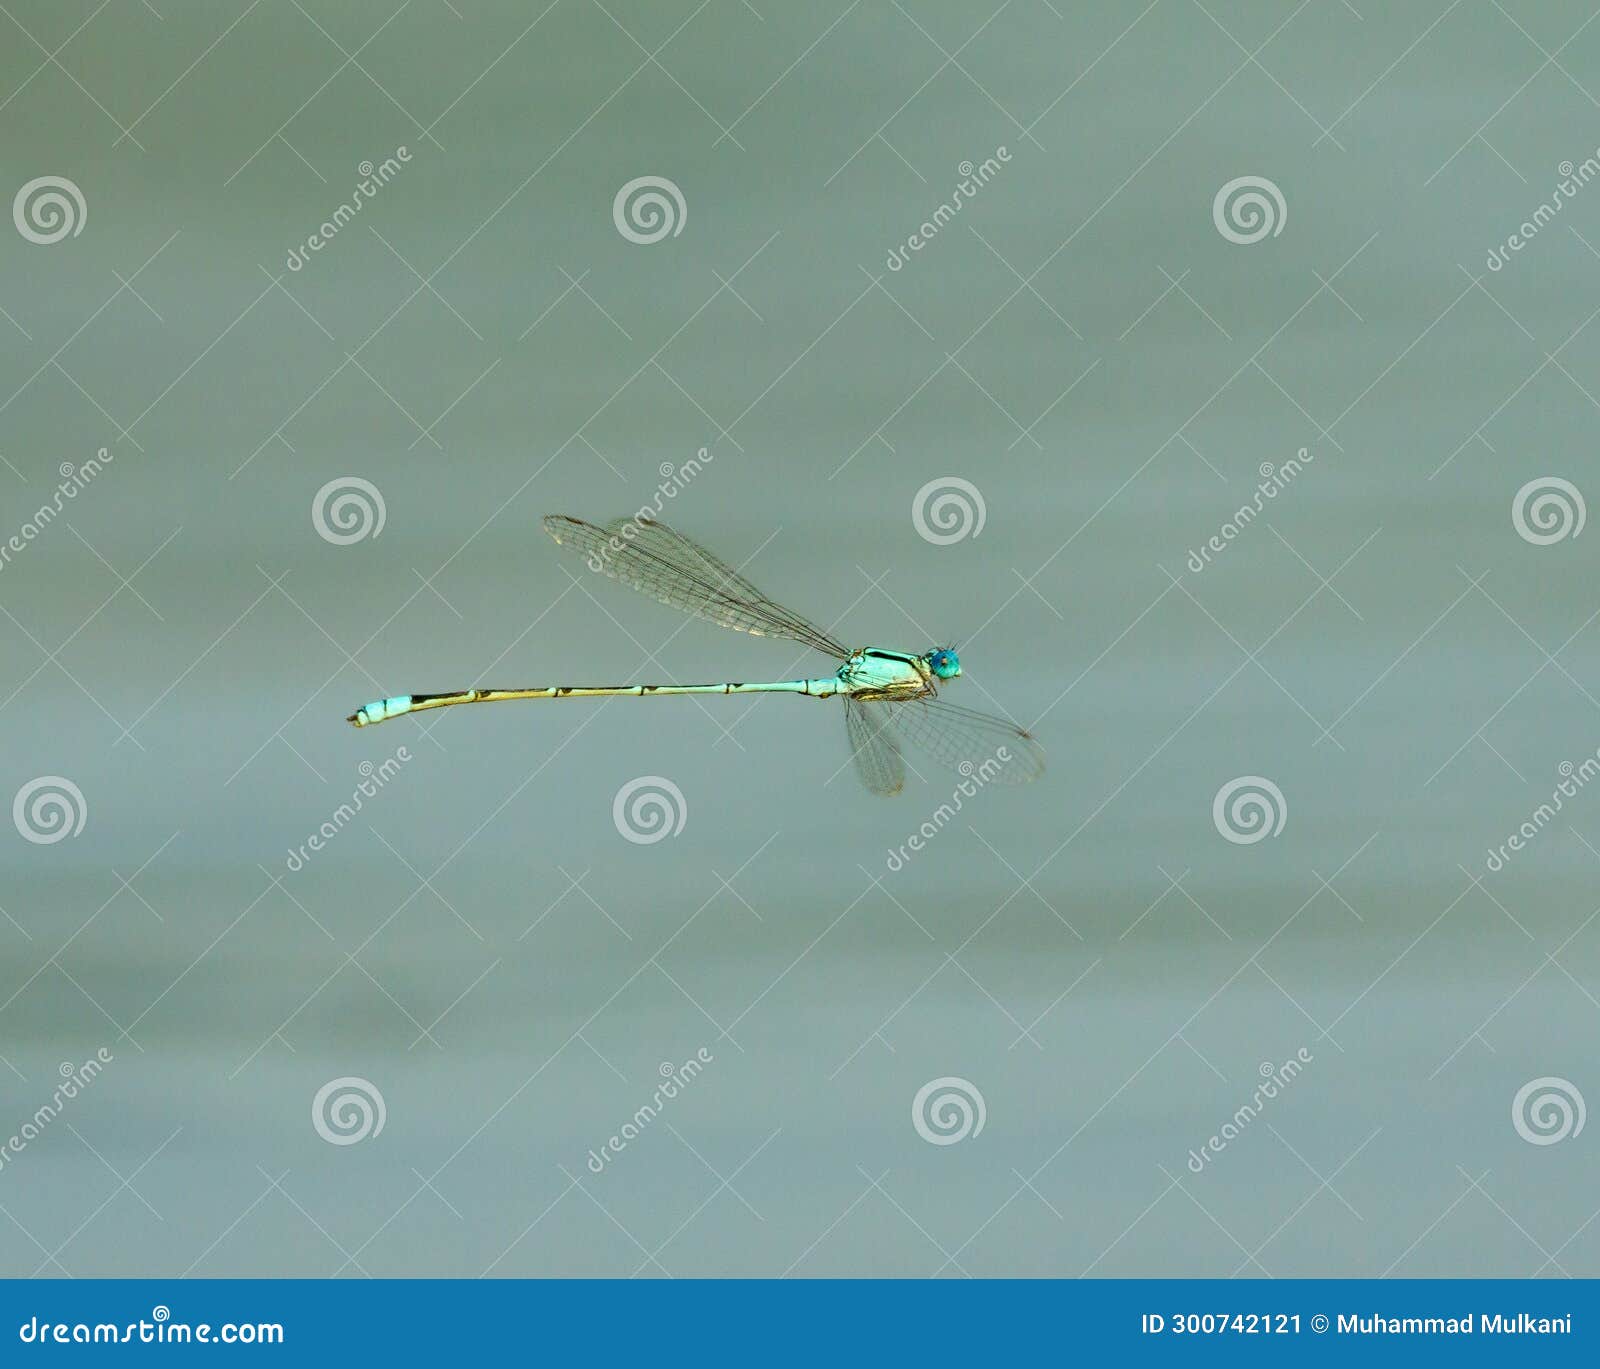 Fly freely in the air stock image. Image of dragonflies - 300742121